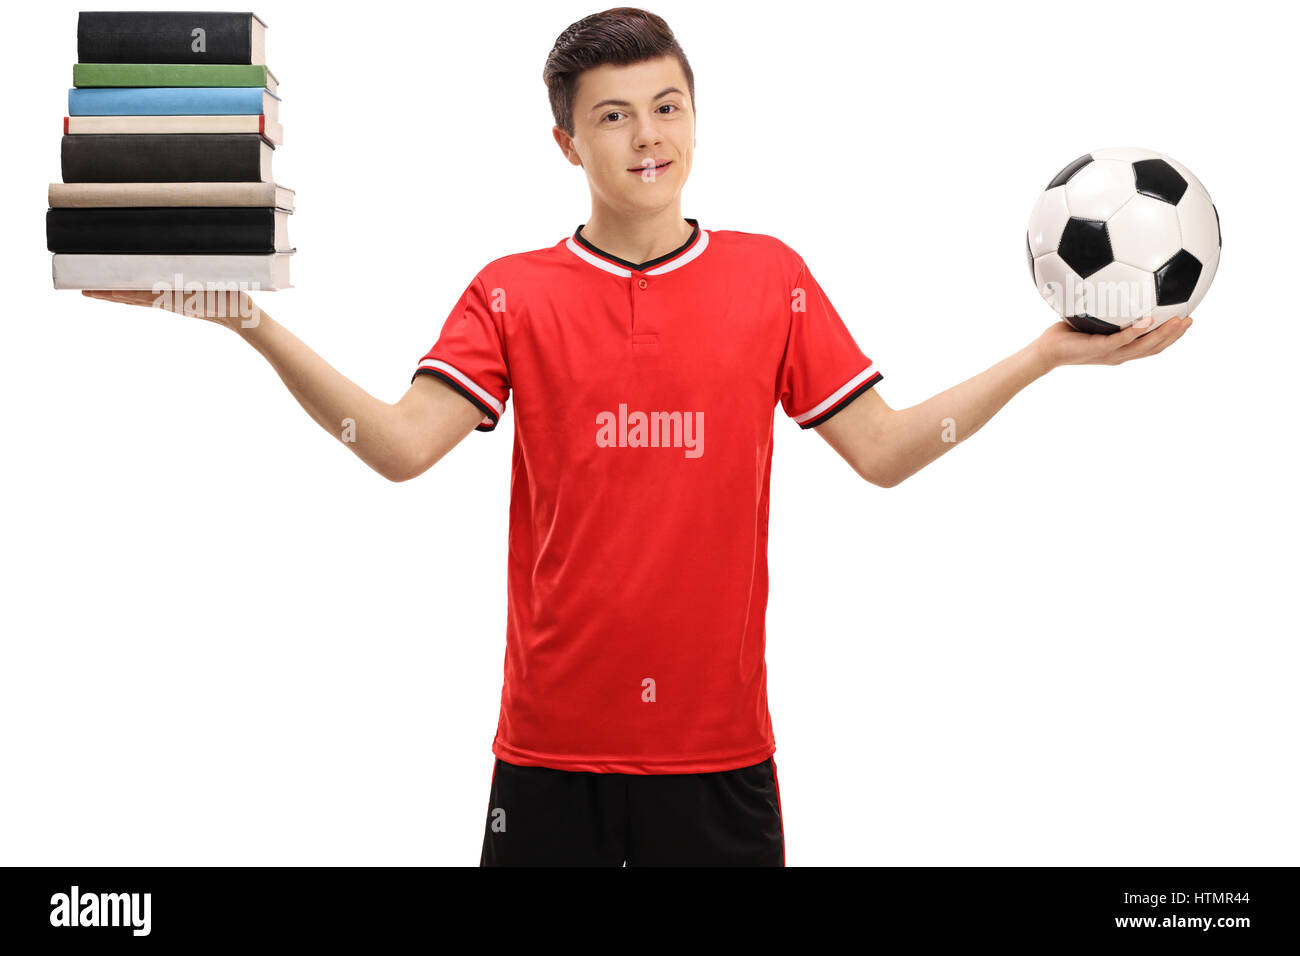 Teenage boy holding a stack of books and a football isolated on white background Stock Photo